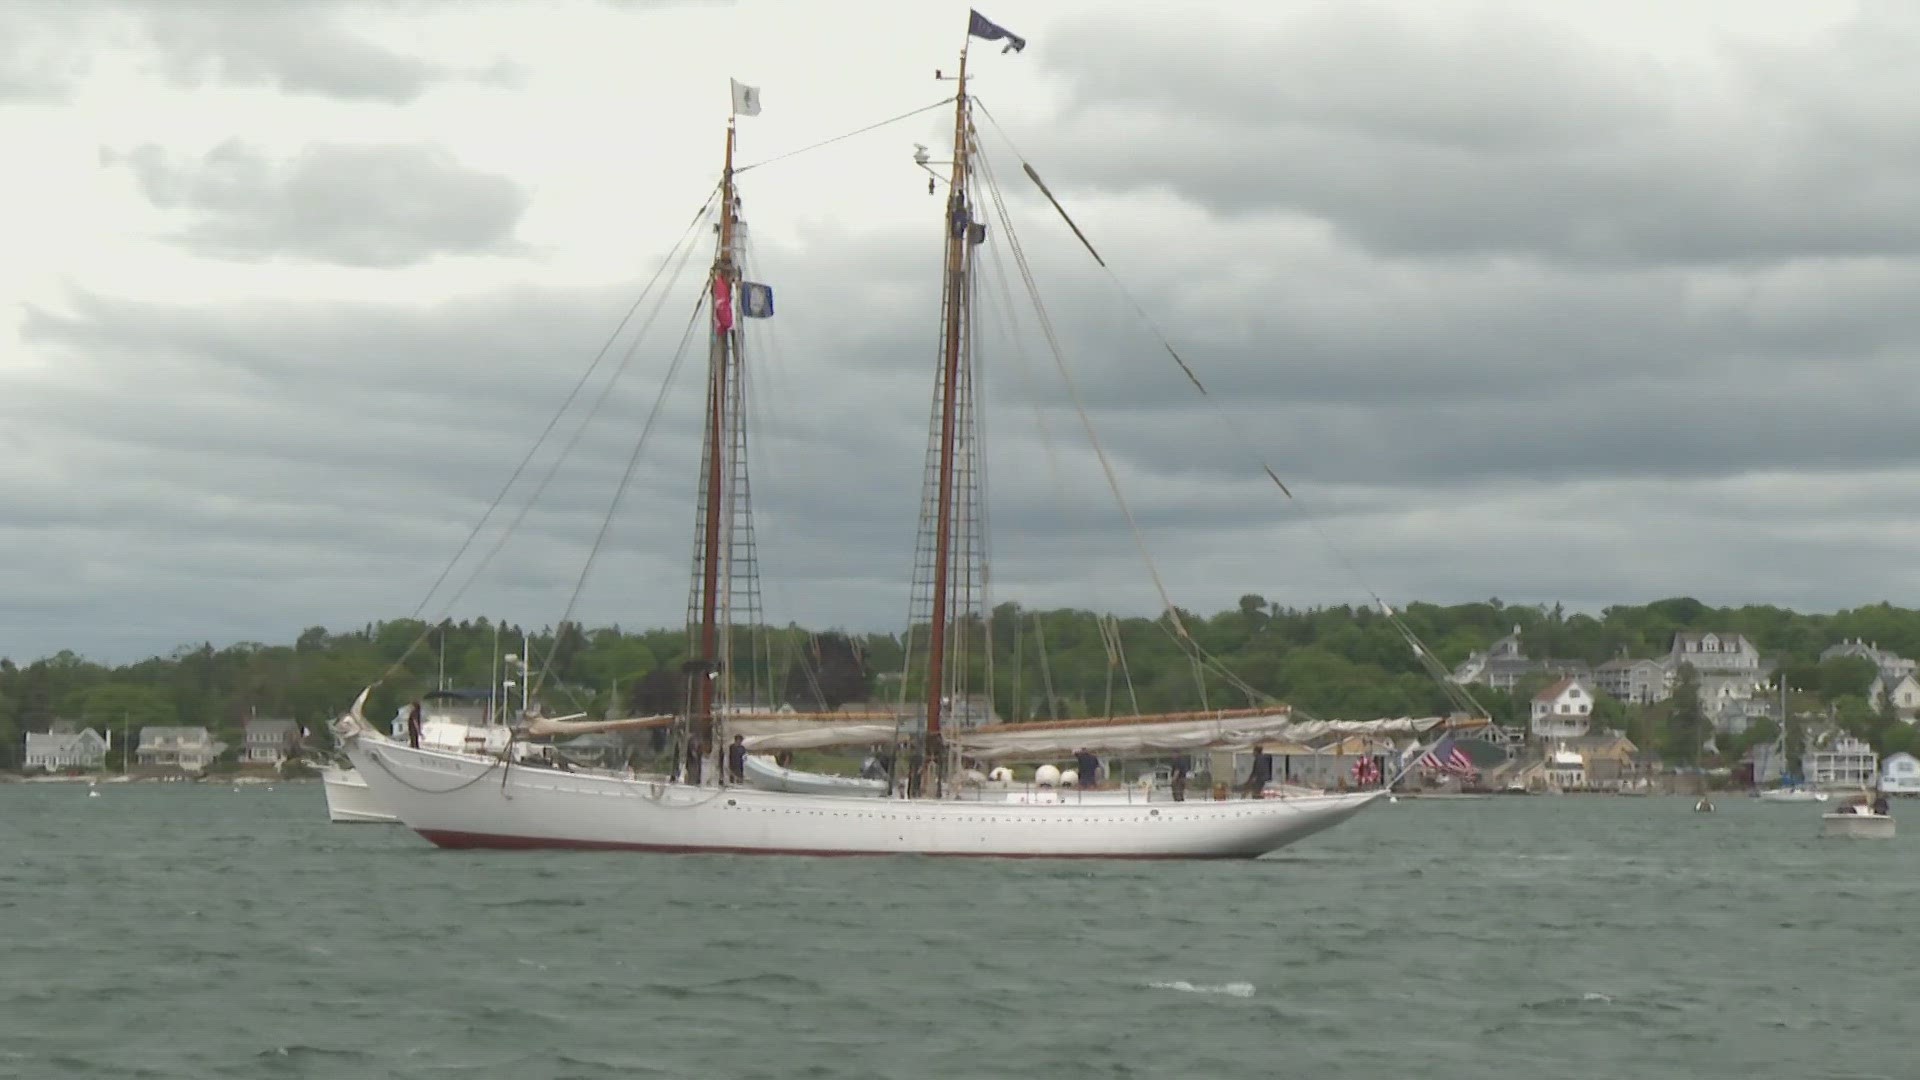 The 102-year-old ship, carrying students from Maine Maritime Academy and Bowdoin College, is bound for Nova Scotia, Newfoundland, and Labrador.